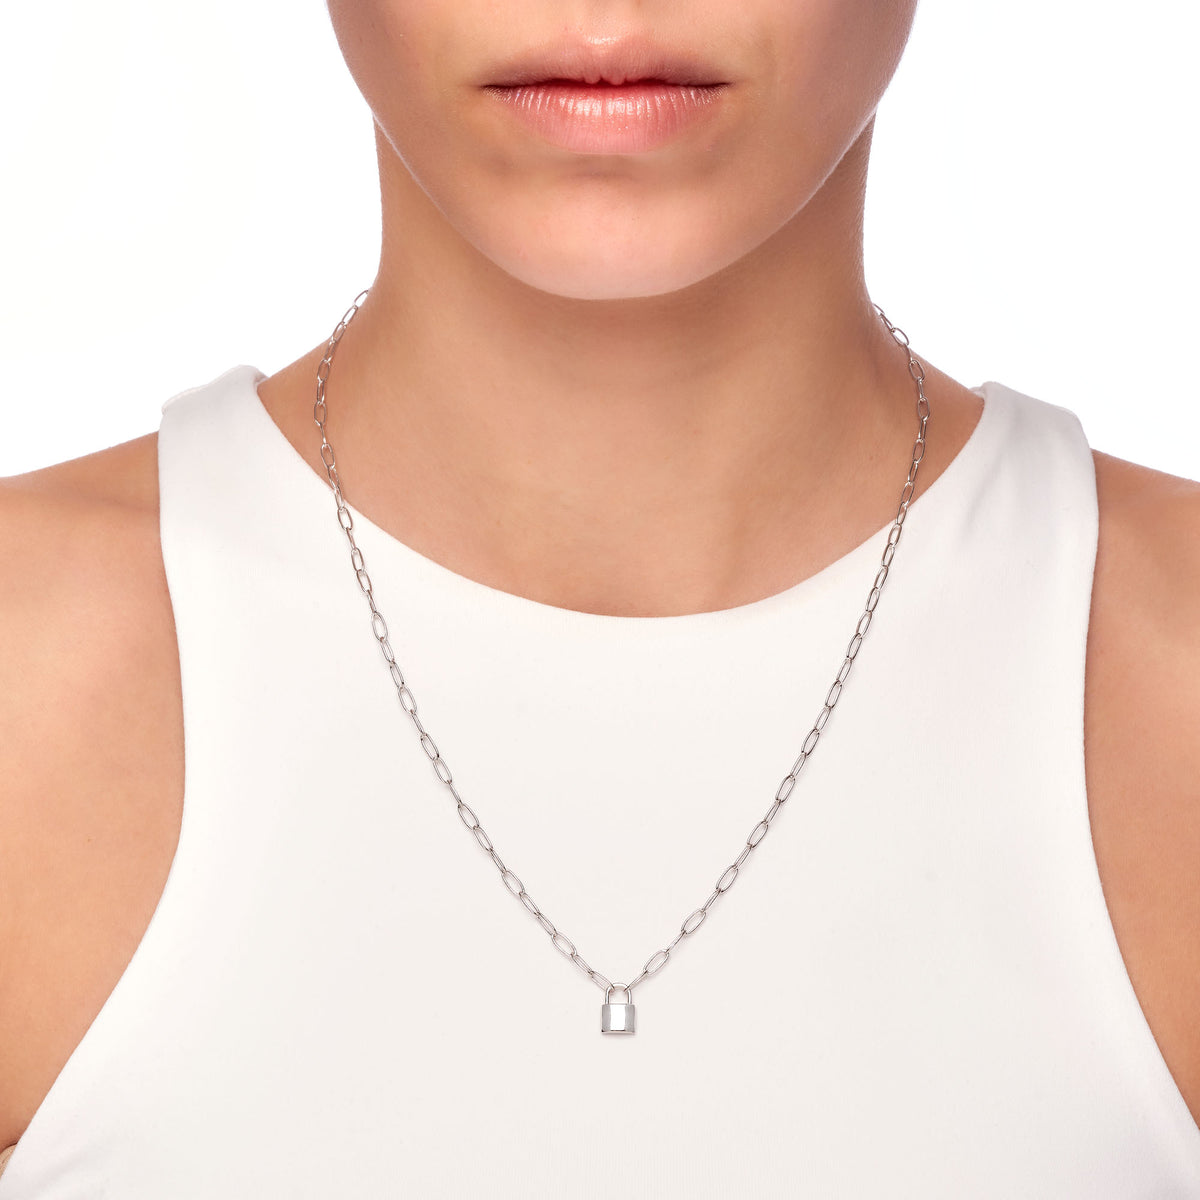 Love Collcetion | Kalukoi Necklace | White Rhodium Plated 925 Silver